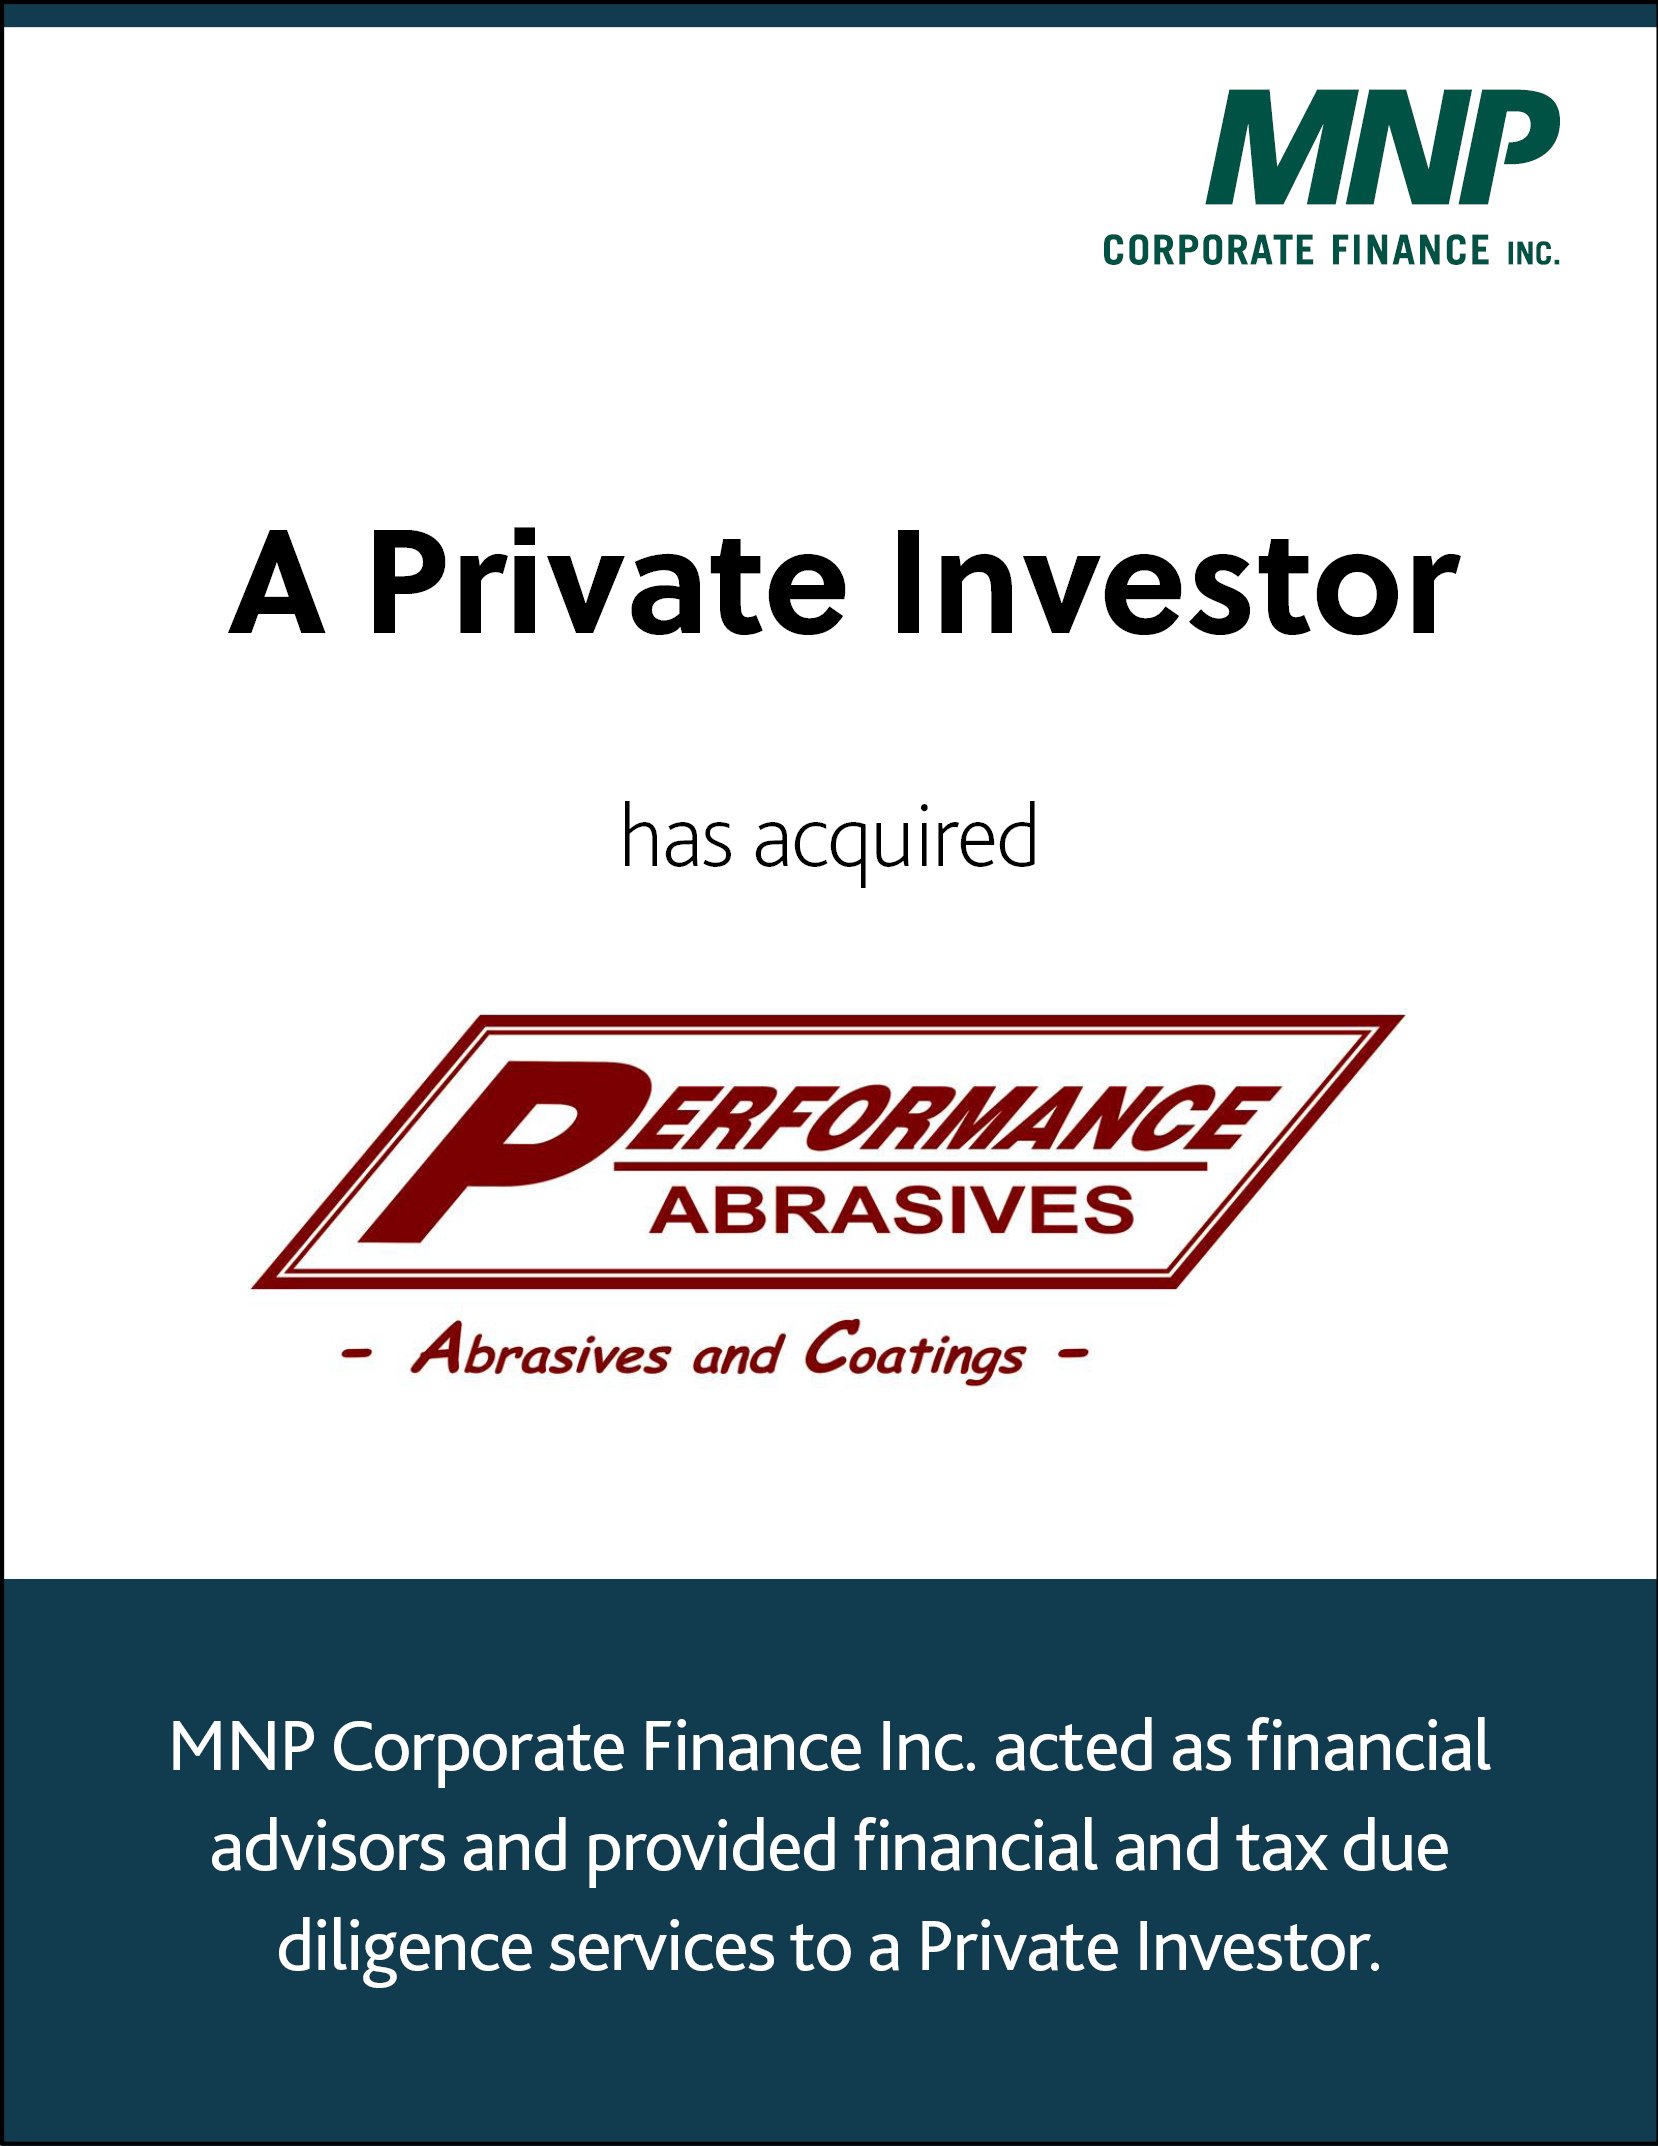 A Private Investor has acquired Performance Abrasives